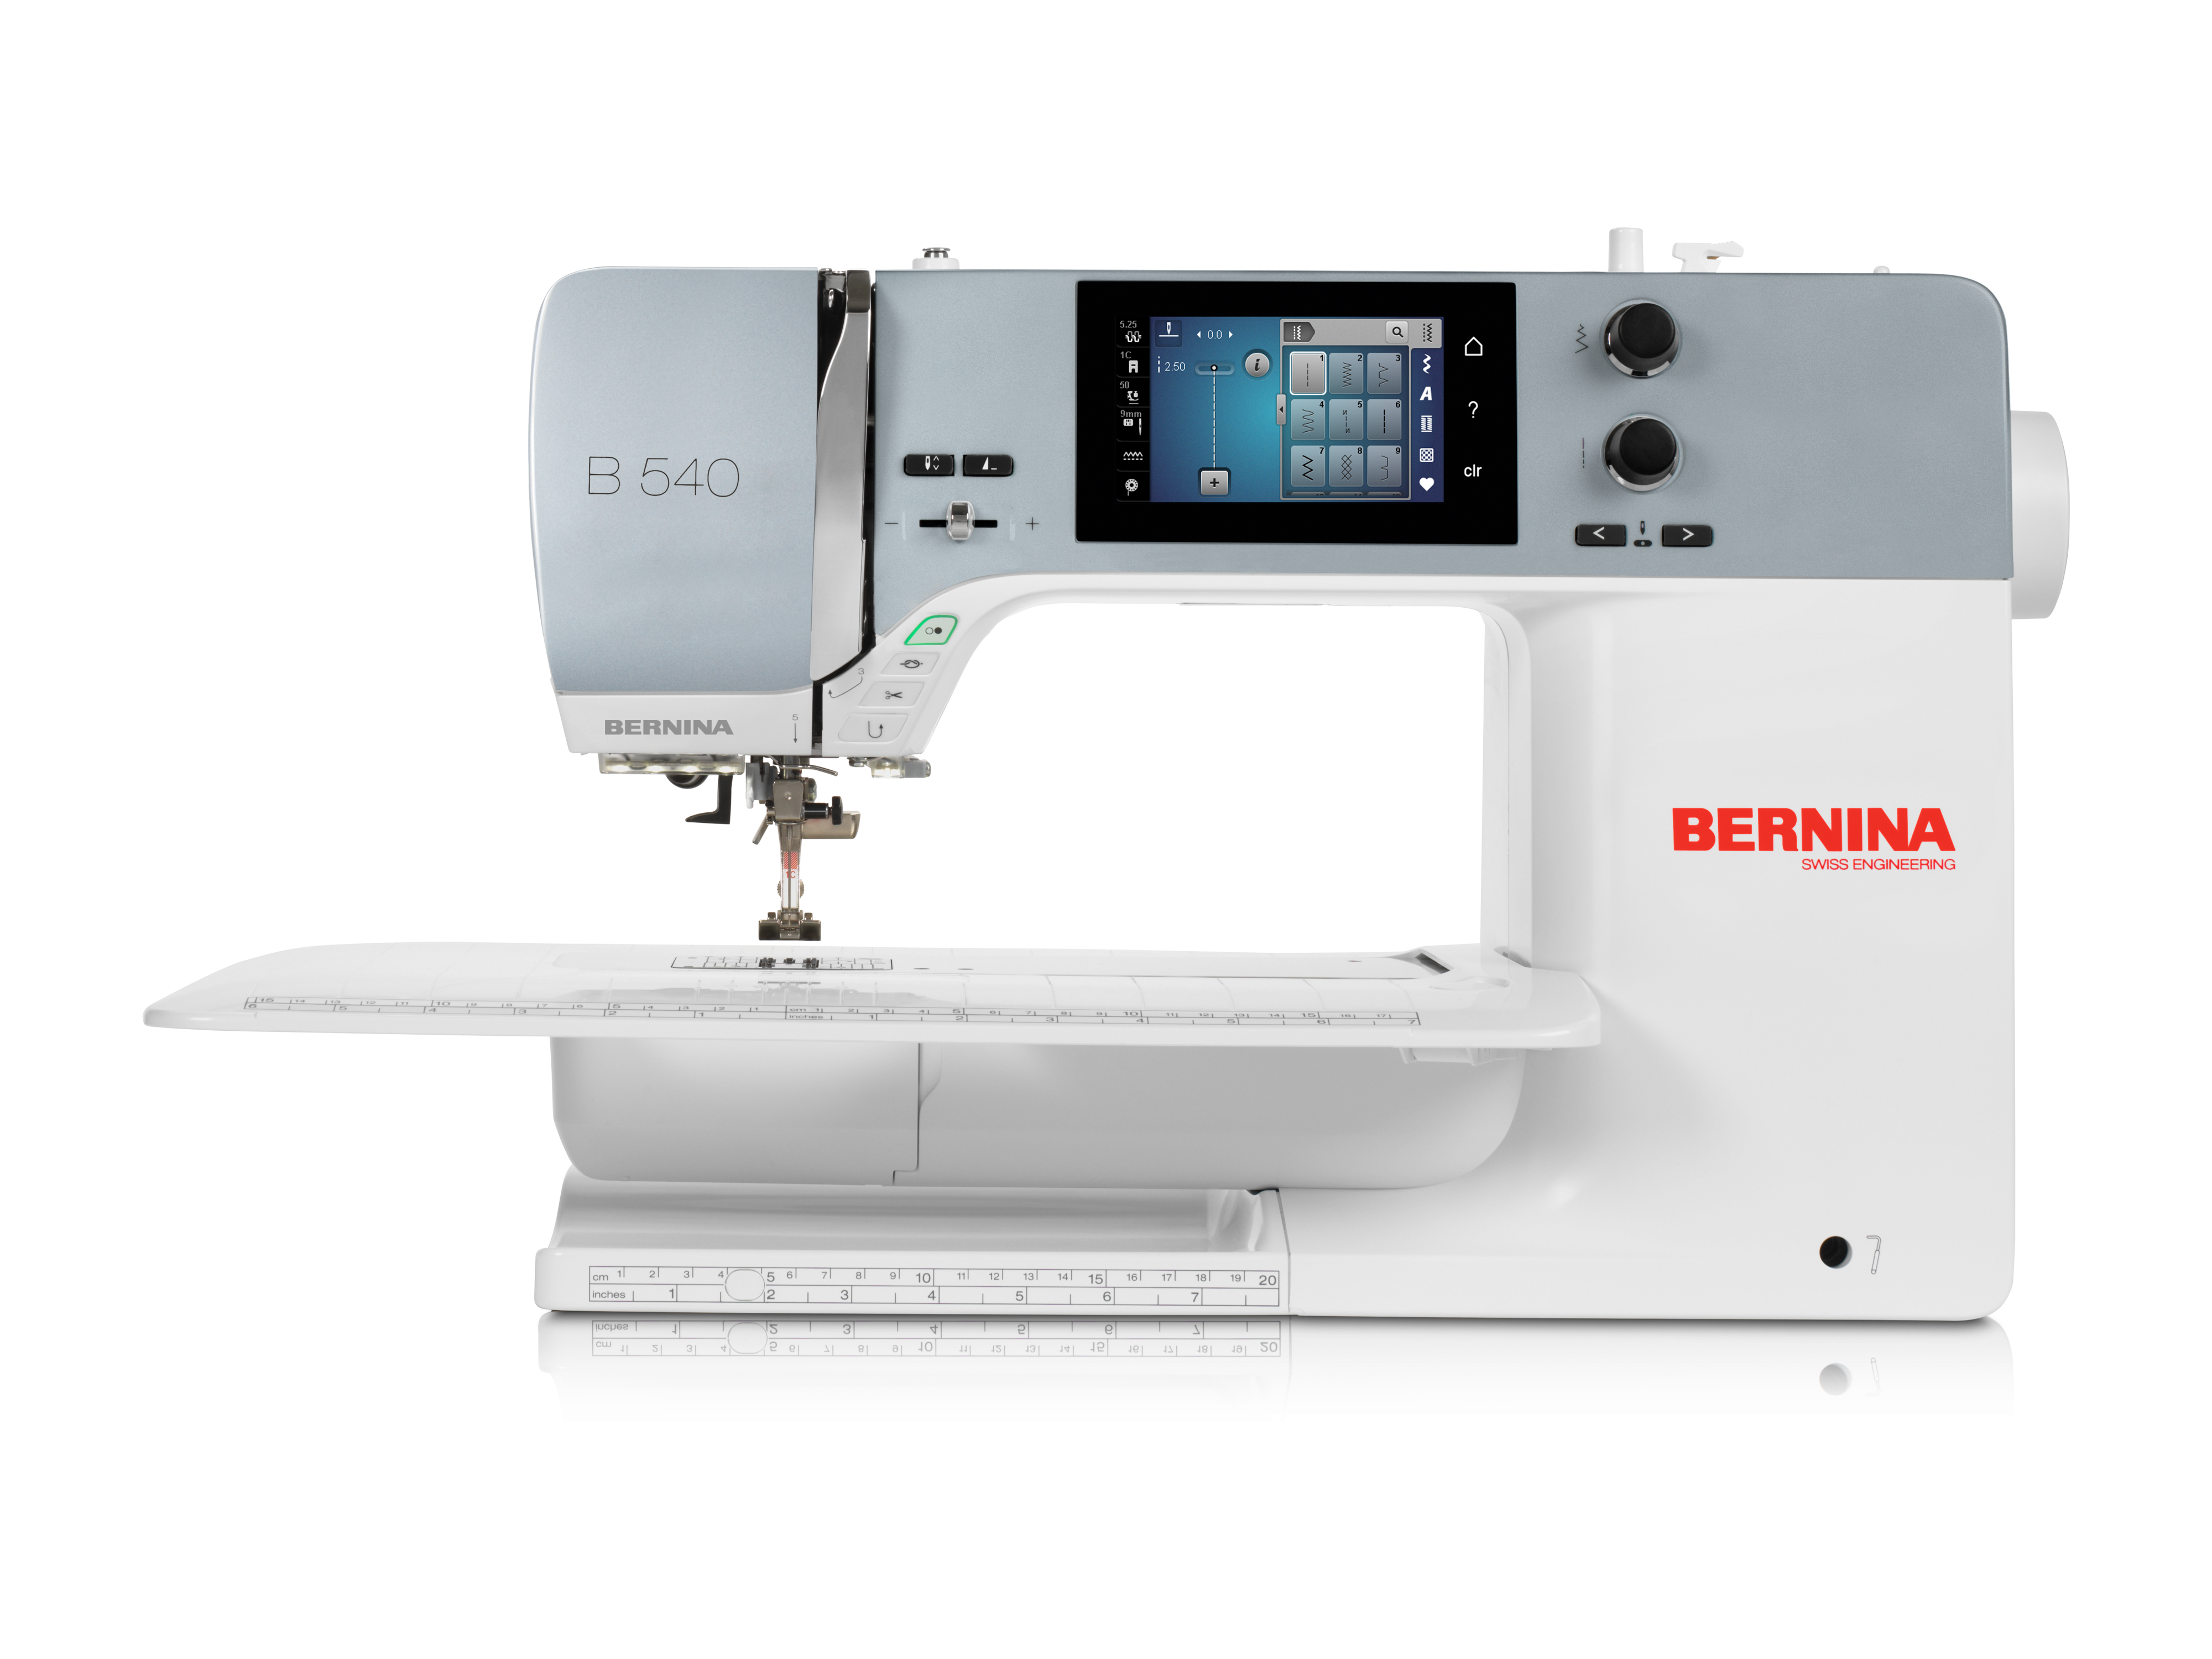 BERNINA 540 Sewing and Embroidery Machine with table